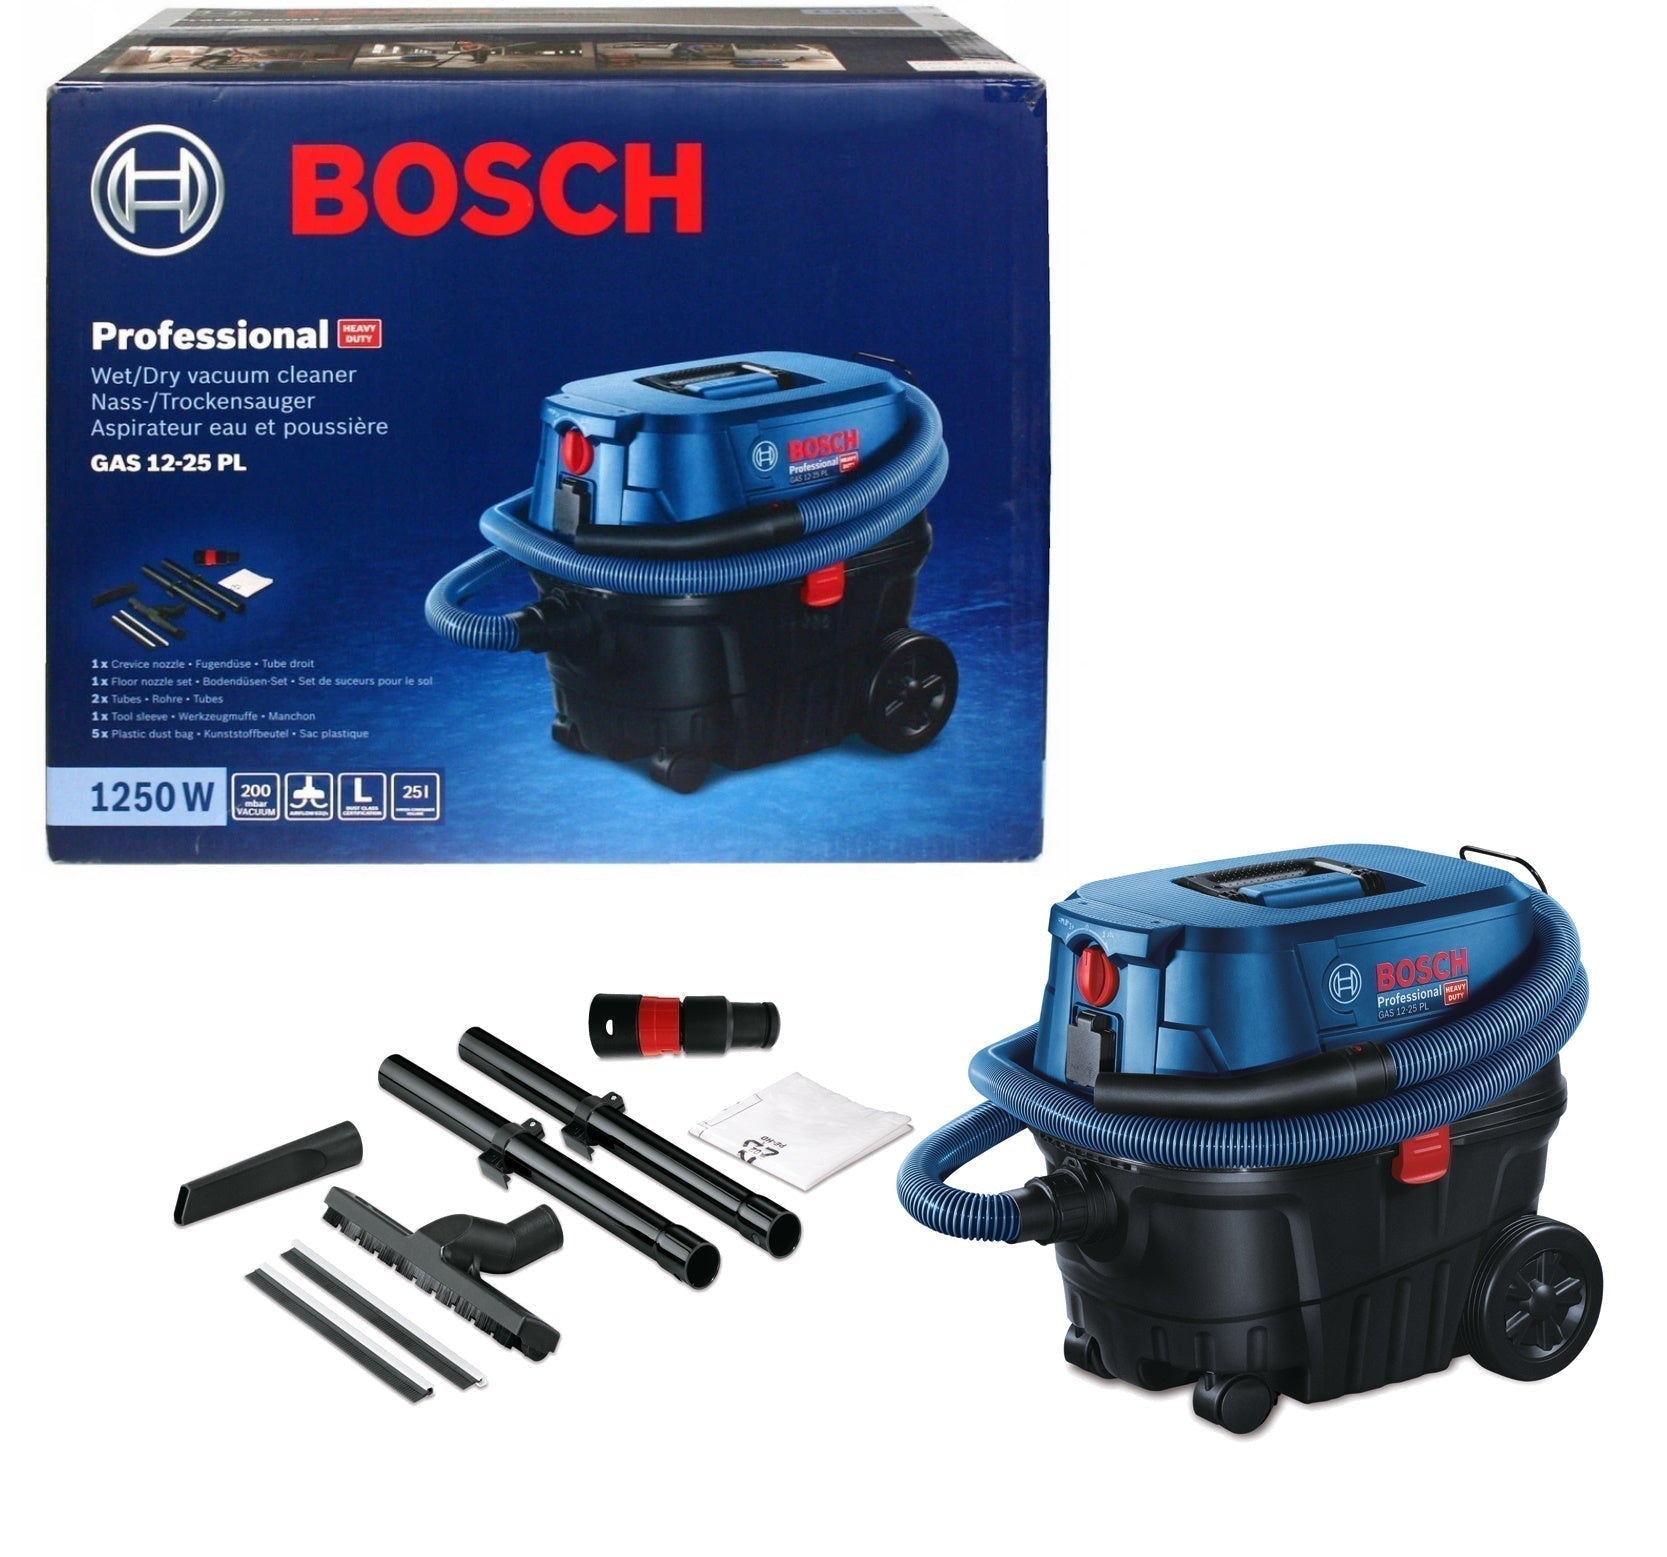 Bosch Professional Wet/Dry Extractor GAS 12-25 PL 060197C1K0 Power Tool Services